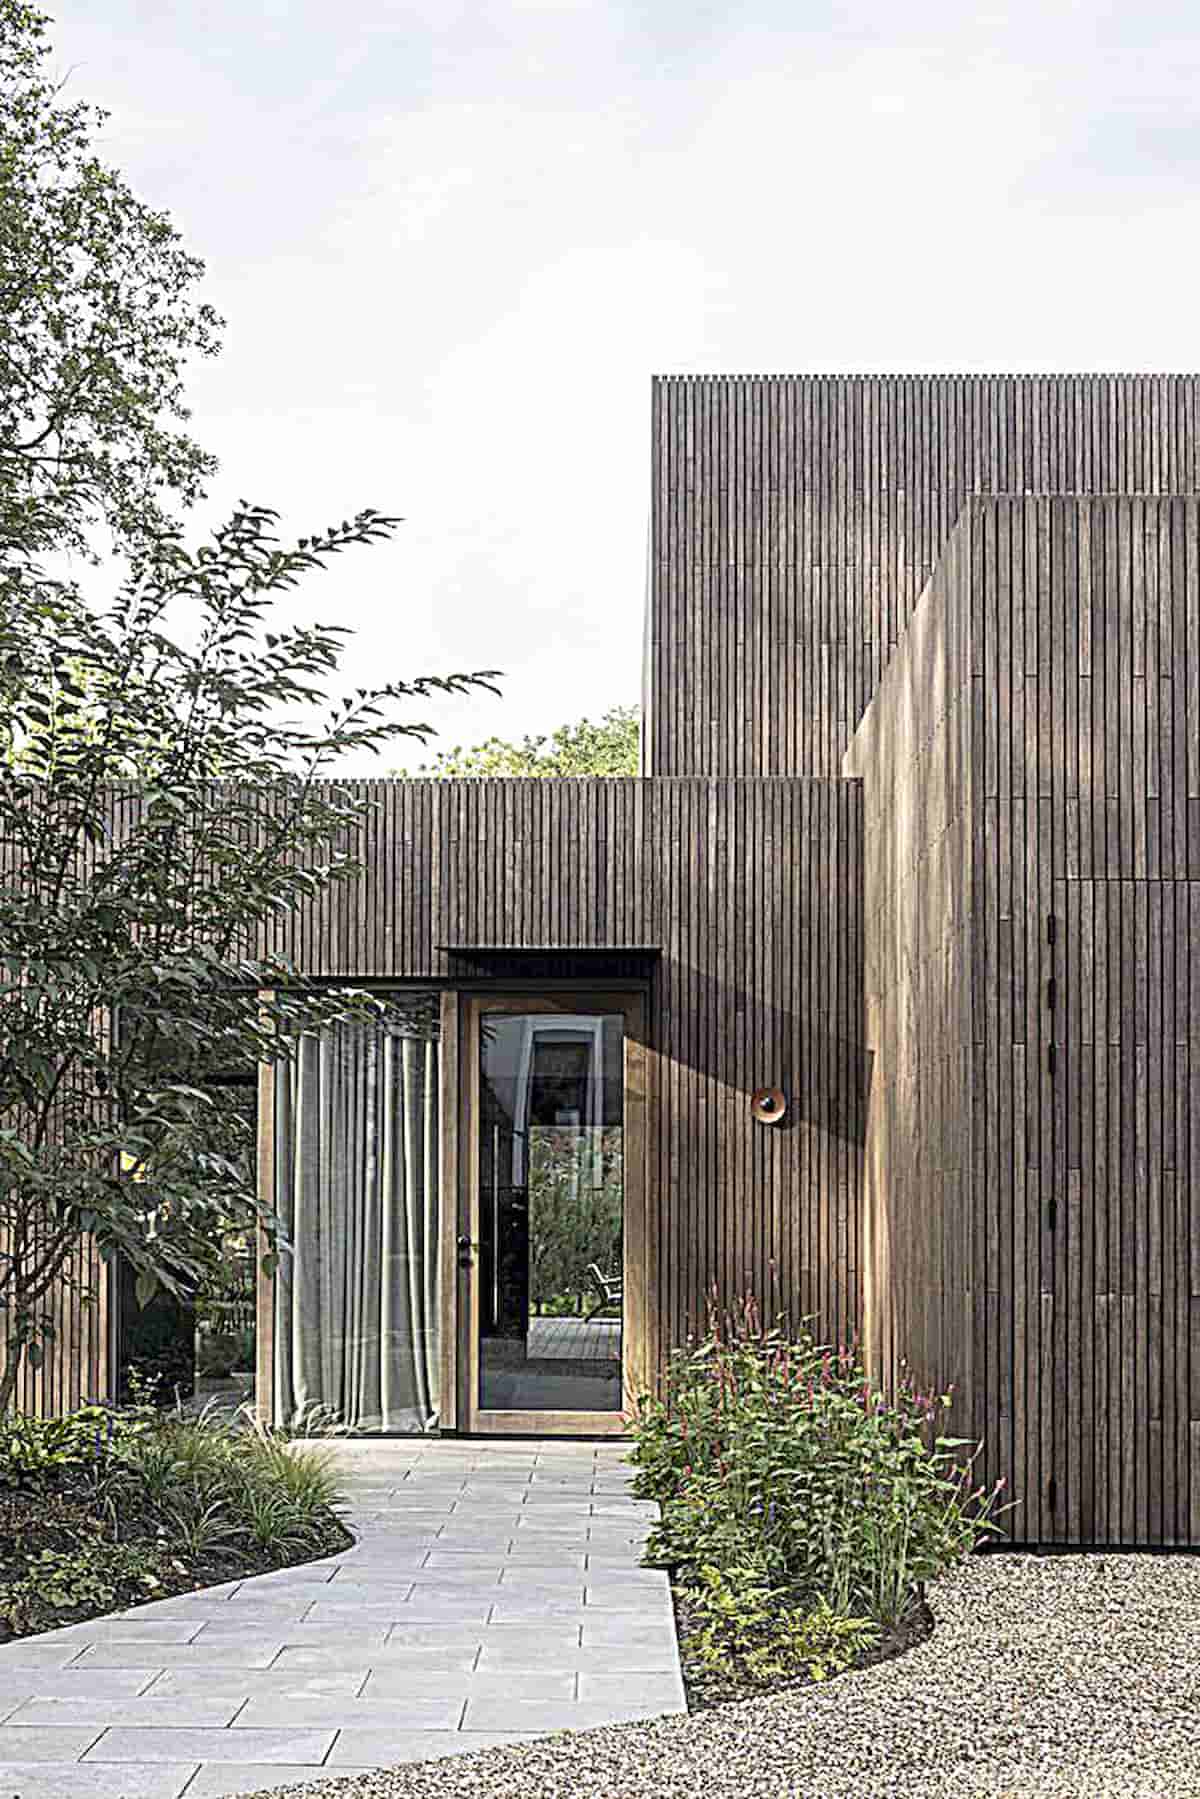 Open-parkvilla : Nestled in a wooded environment while preserving a high-quality residential area that offers tranquility space, and lush surroundings — #Houses #Limburg #residential_park #Residential_Architecture #The_Netherlands, #Villa